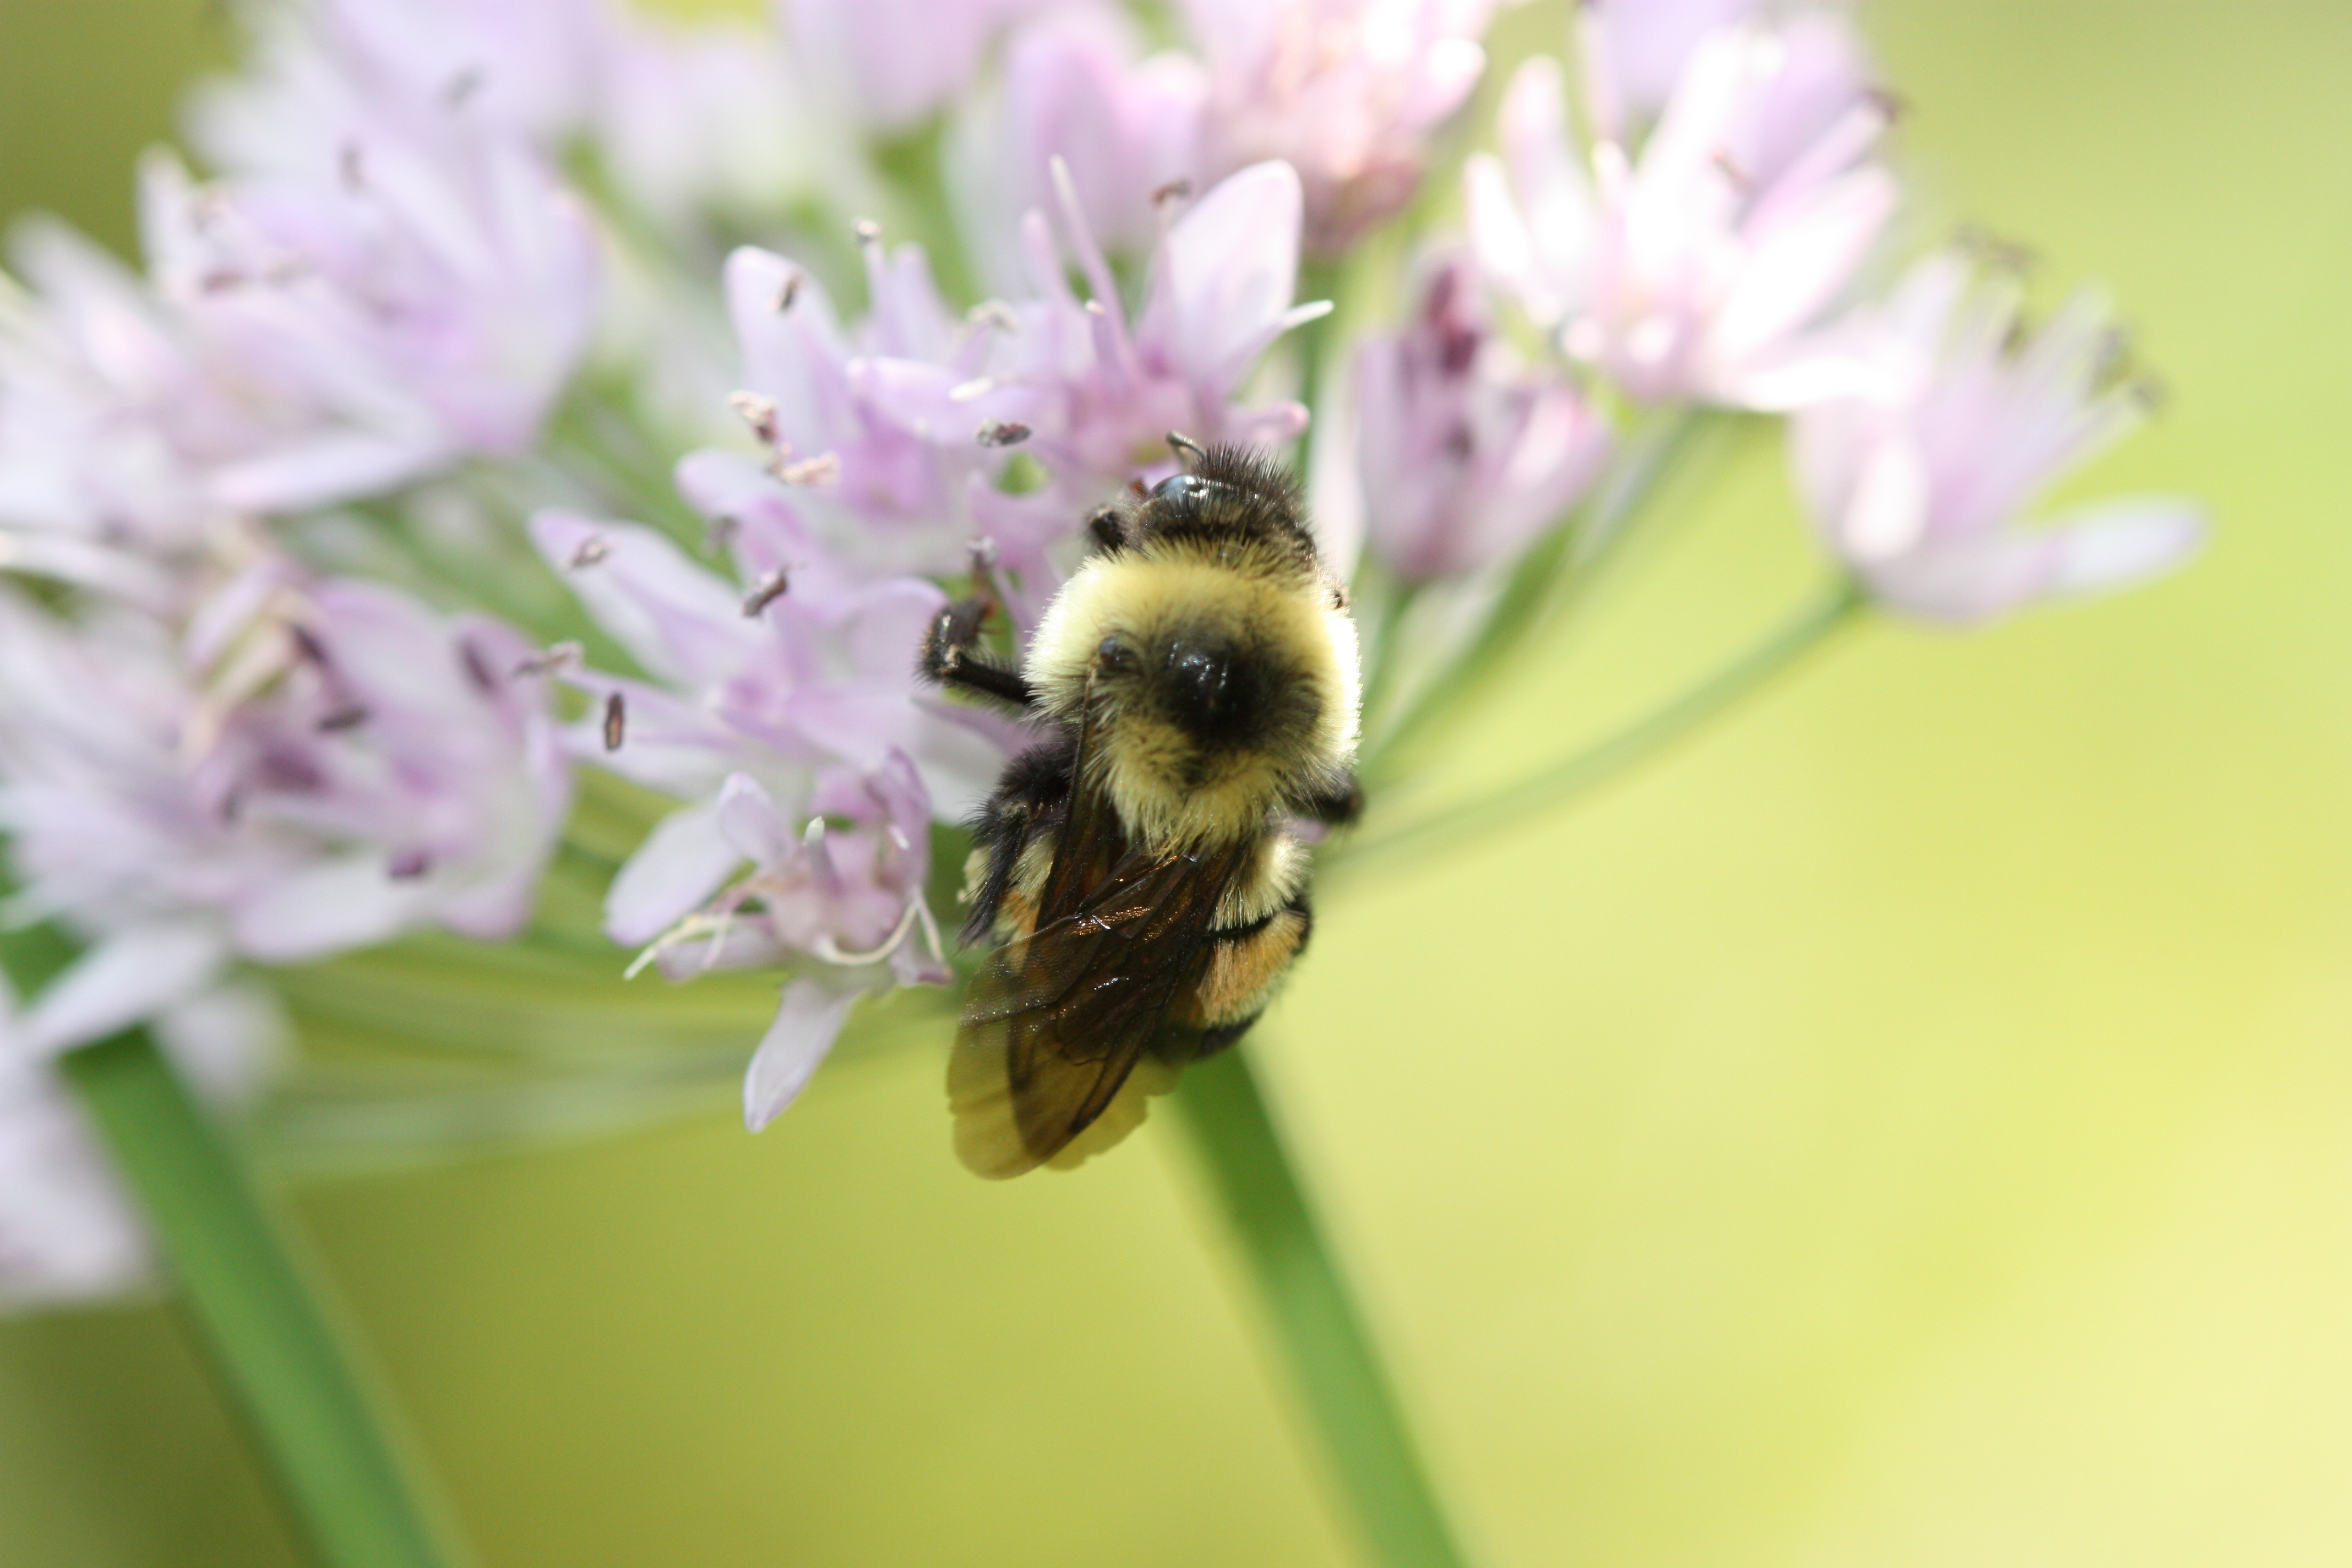 A fuzzy, yellow and black striped bumble bee with a rust-colored patch on its back clings to a cluster of pale purple flowers. The background, which is blurry, is bright green.